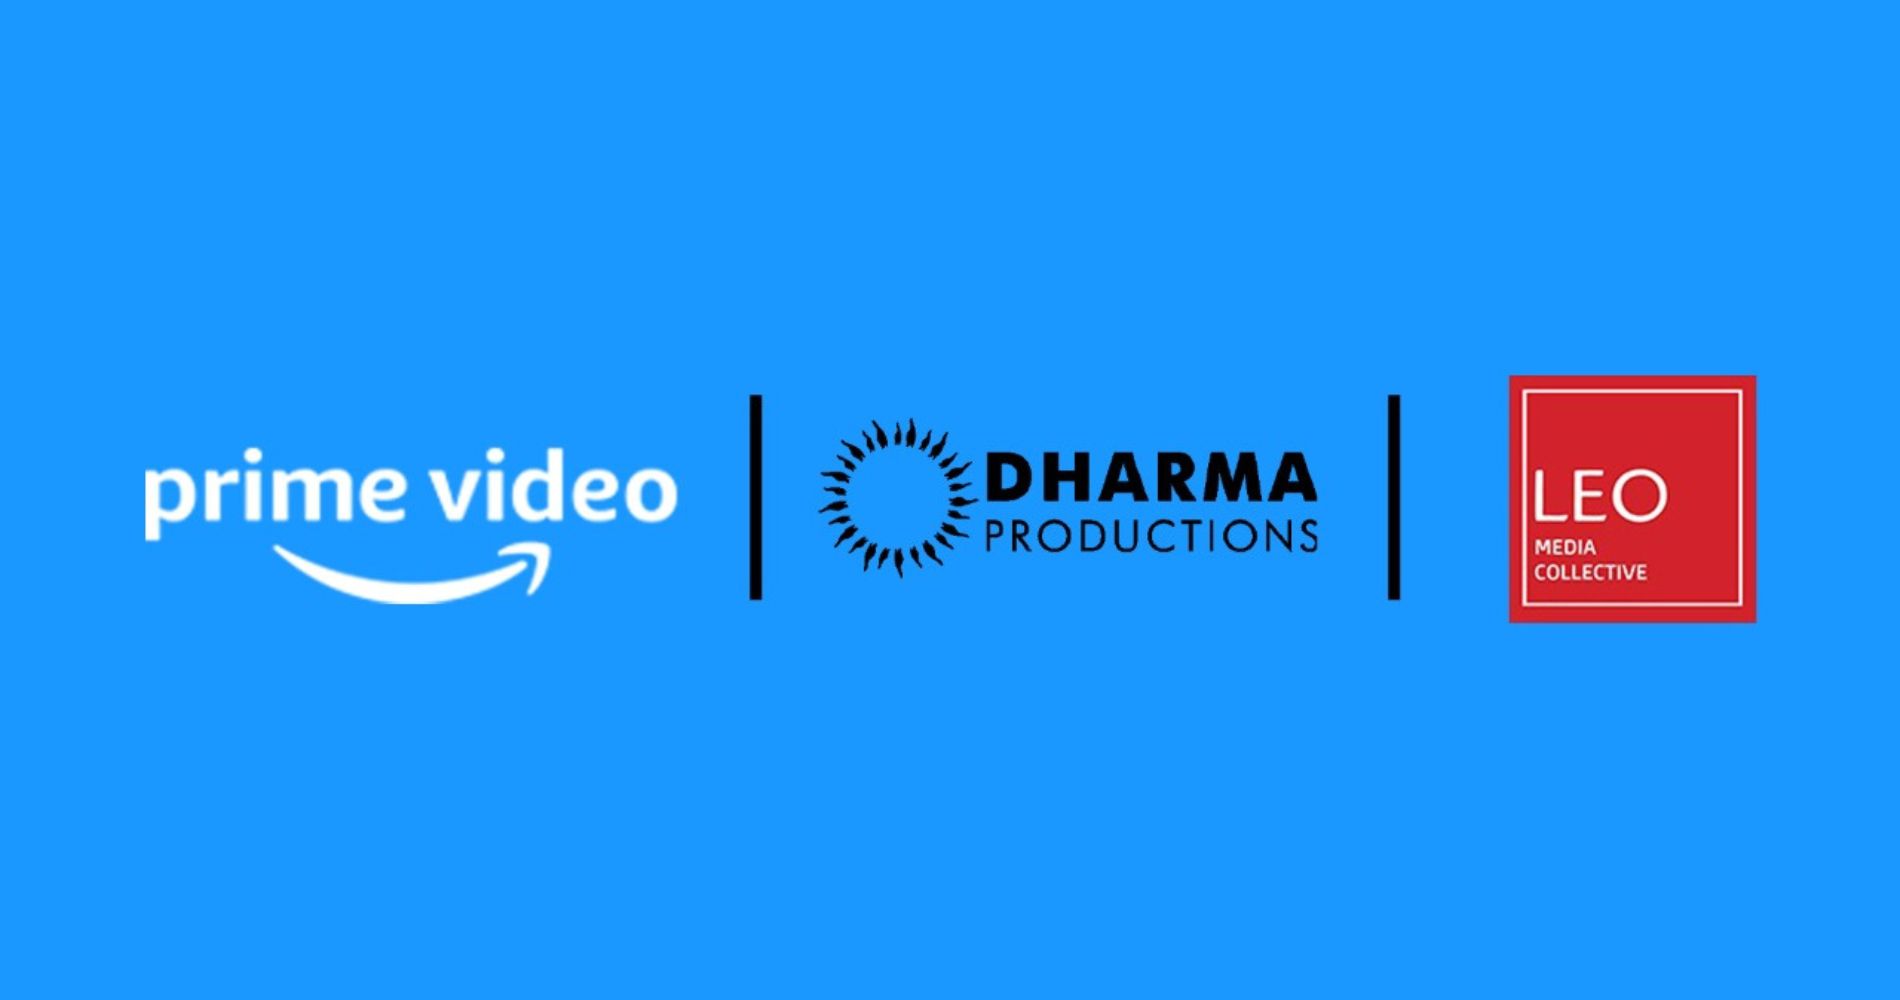 Prime Video announcing collaboration for theatrical release with Karan Johar’s